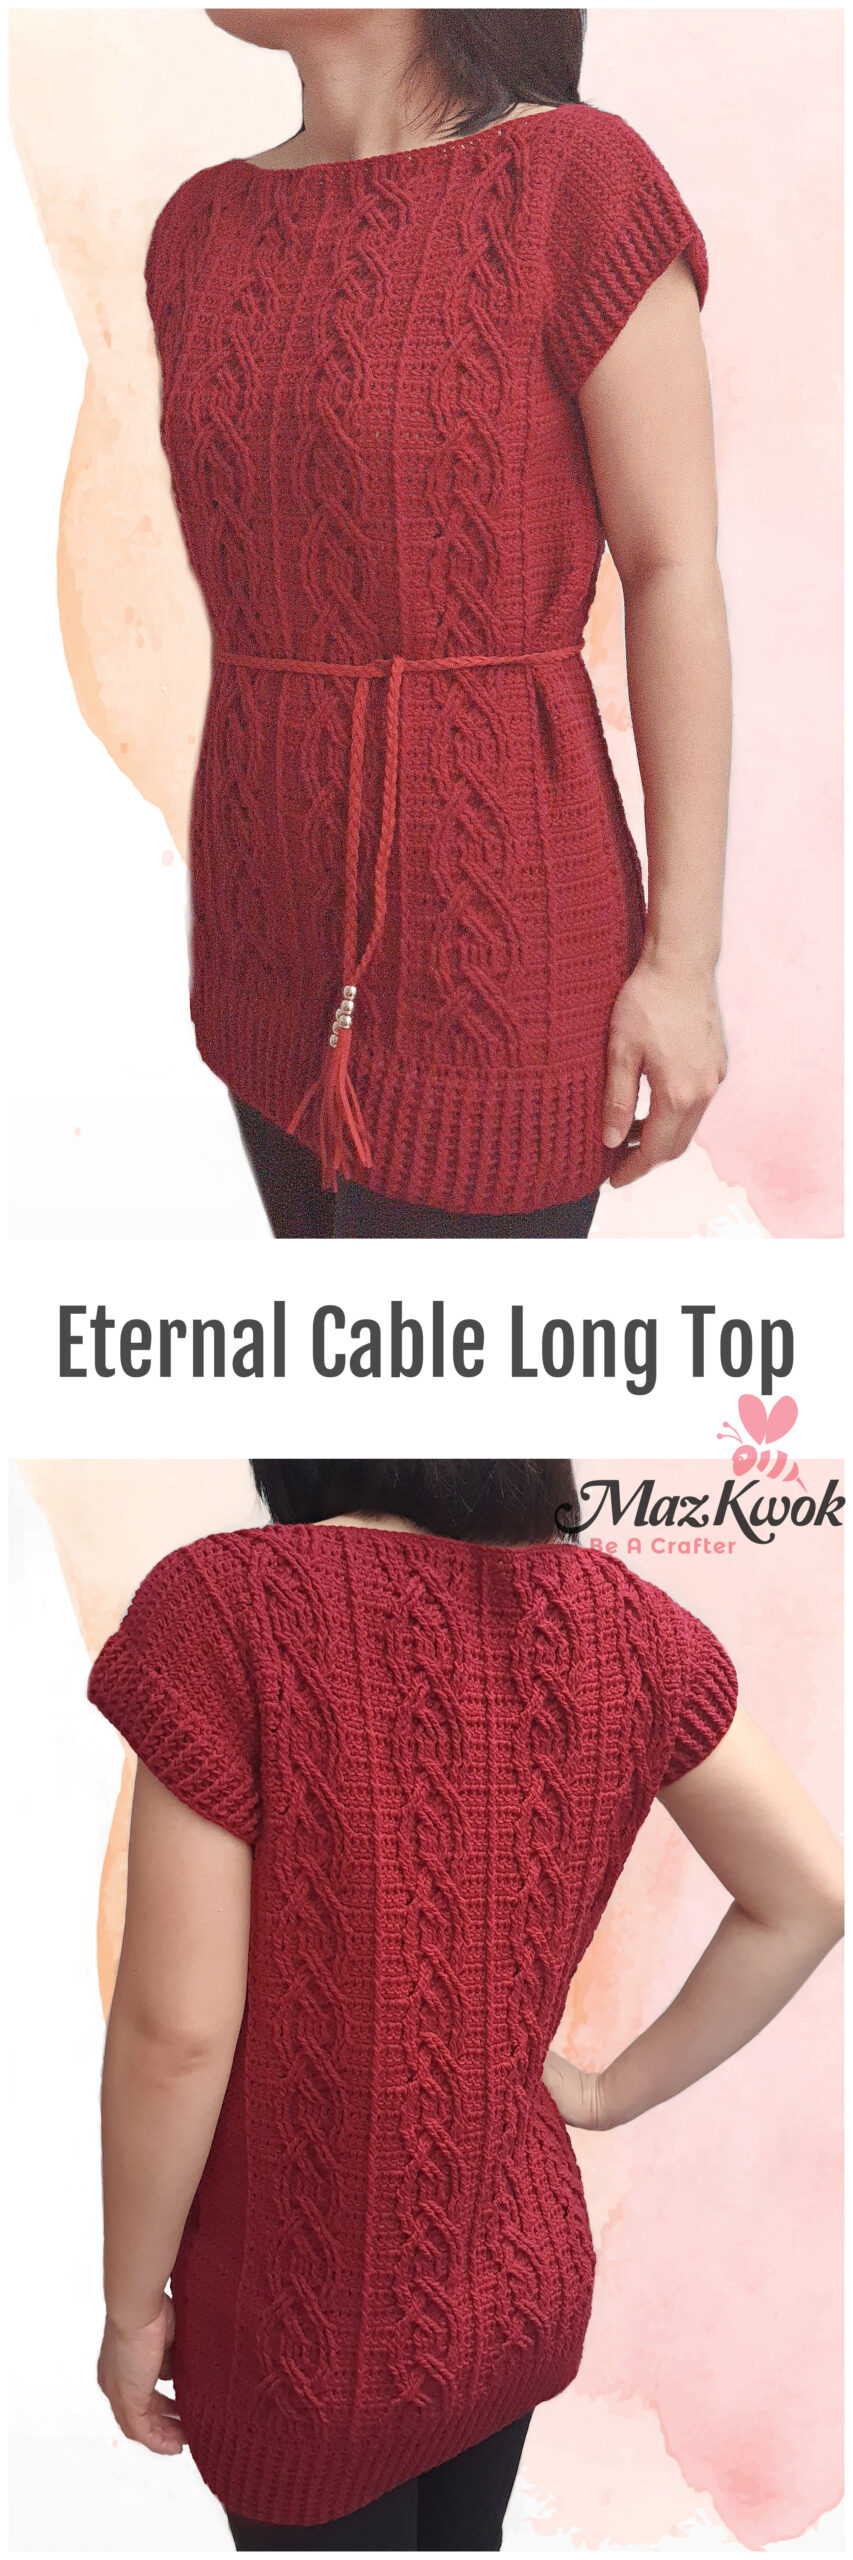 cable long top